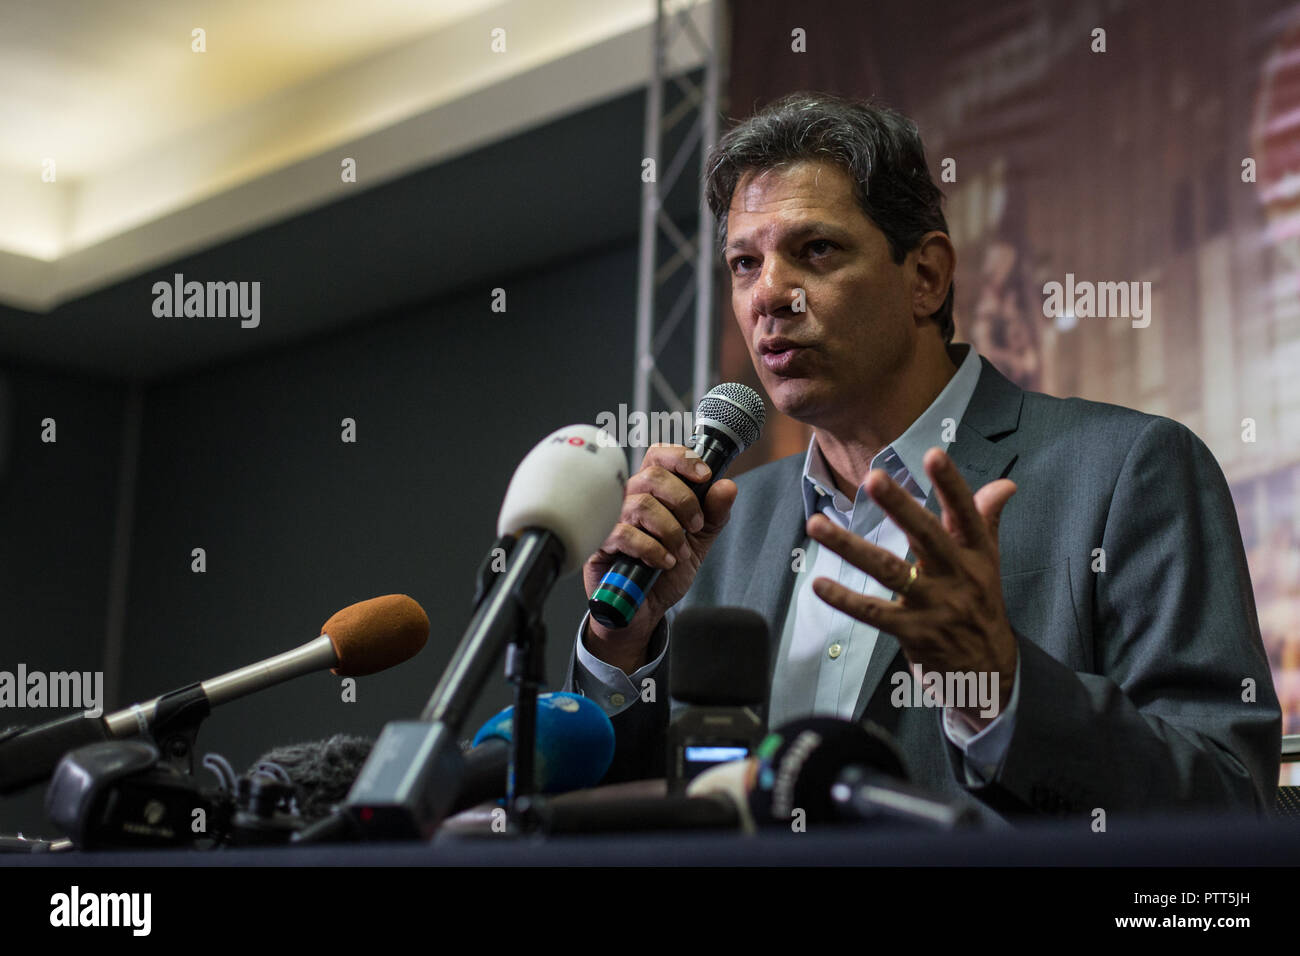 Sao Paulo, Brazil. 10th Oct, 2018. 10 October 2018, Brazil, Sao Paulo: Fernando Haddad, candidate of the Labour Party for the office of Brazilian presidency, speaks at a press conference in Sao Paulo. Haddad called on his political opponent, the ultra-right Bolsonaro, to take part in a debate before the run-off. Credit: Warley Kenji/dpa/Alamy Live News Stock Photo